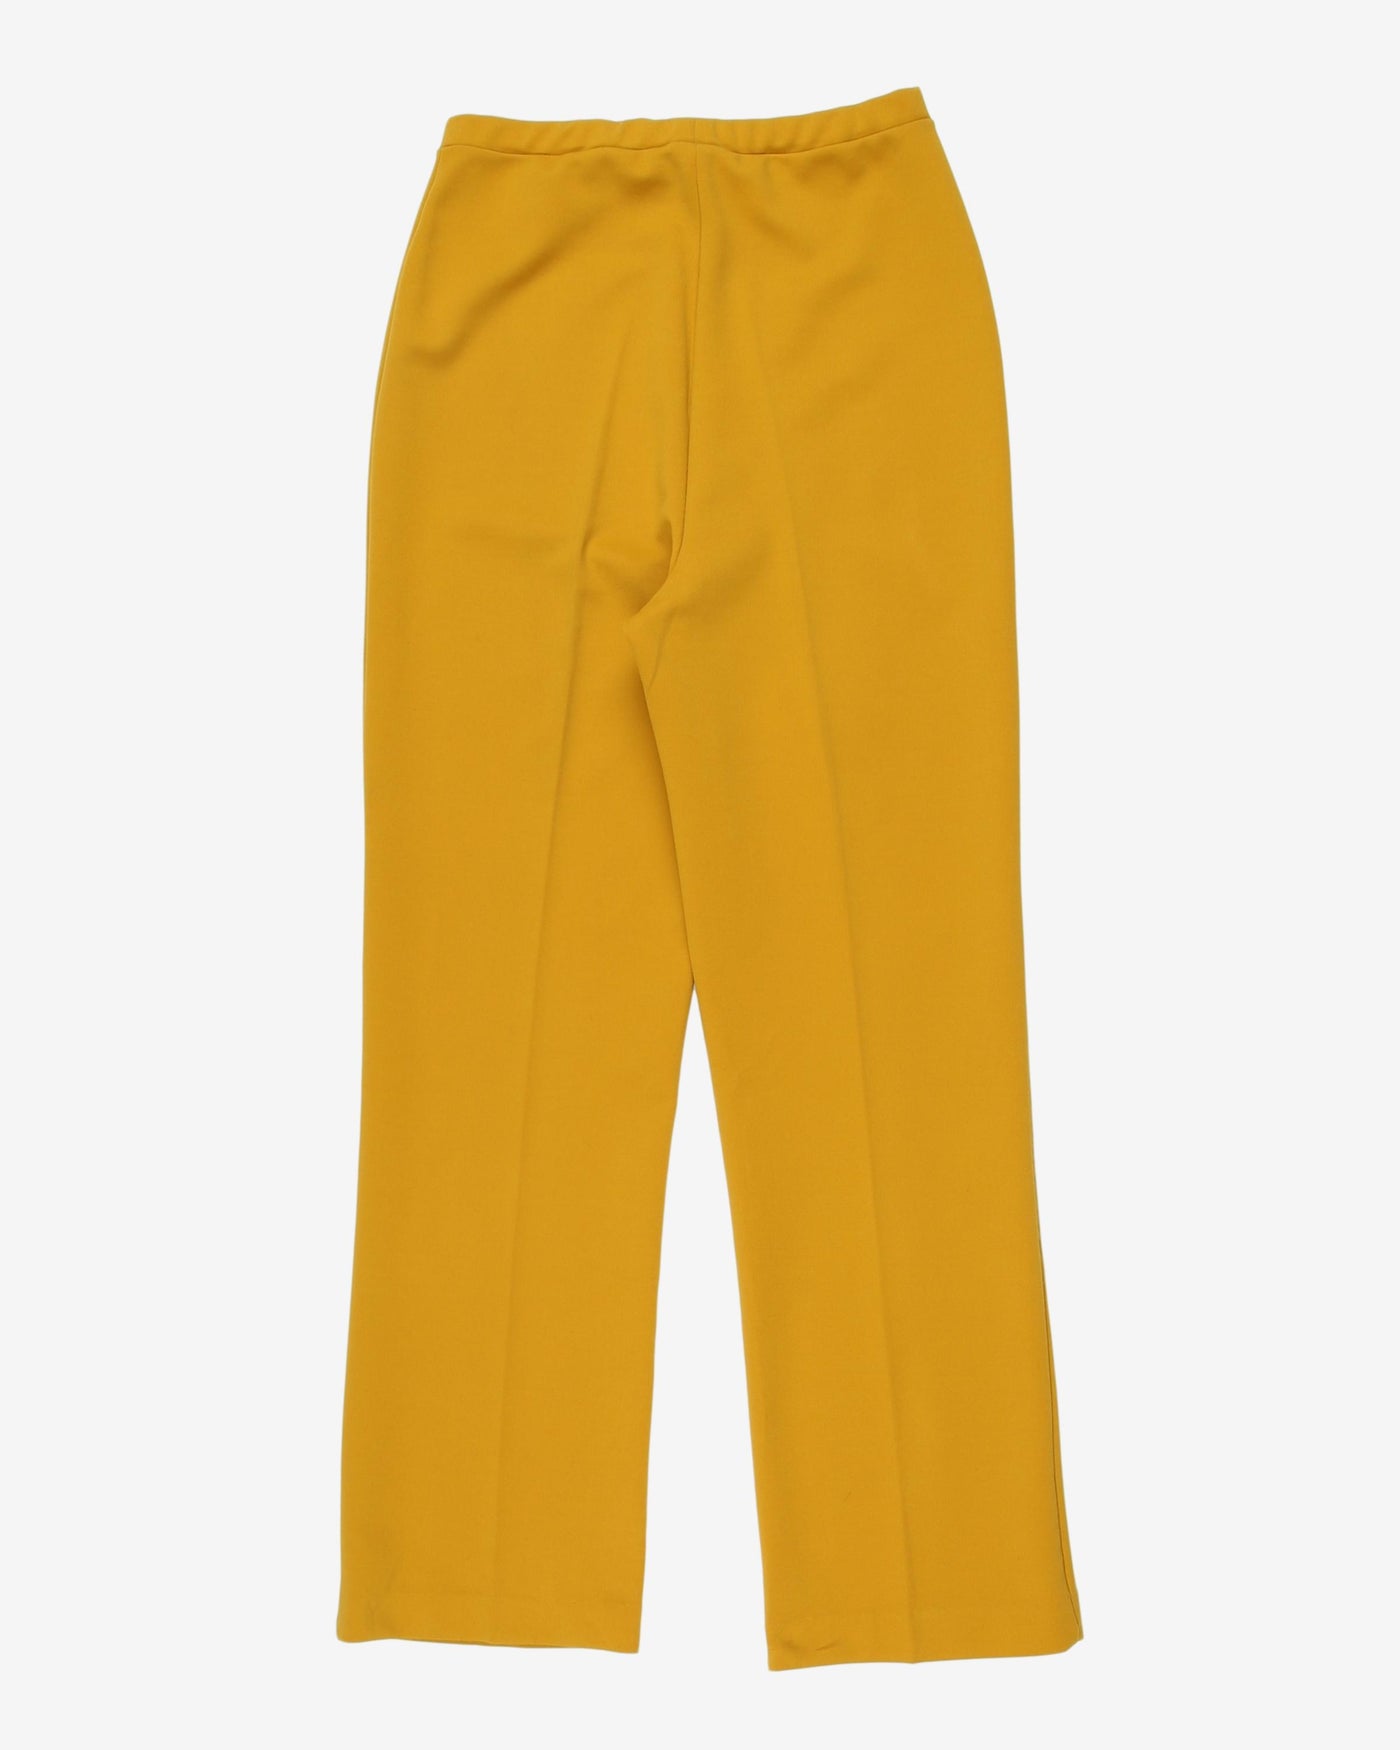 pykettes mustard yellow high waisted trousers - w26l28